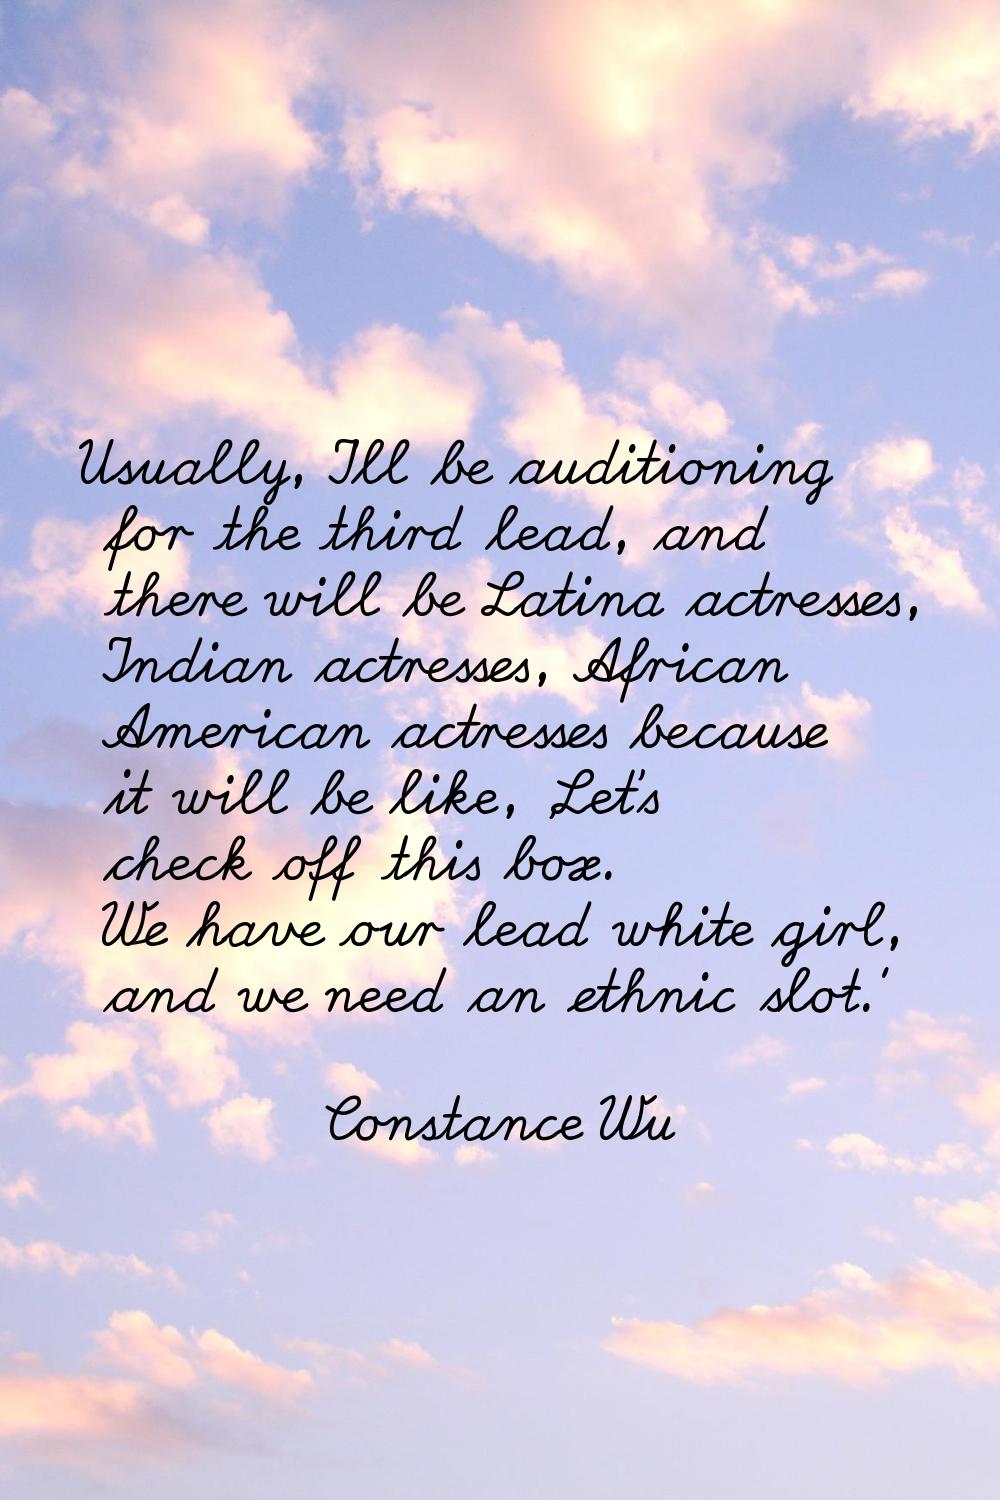 Usually, I'll be auditioning for the third lead, and there will be Latina actresses, Indian actress